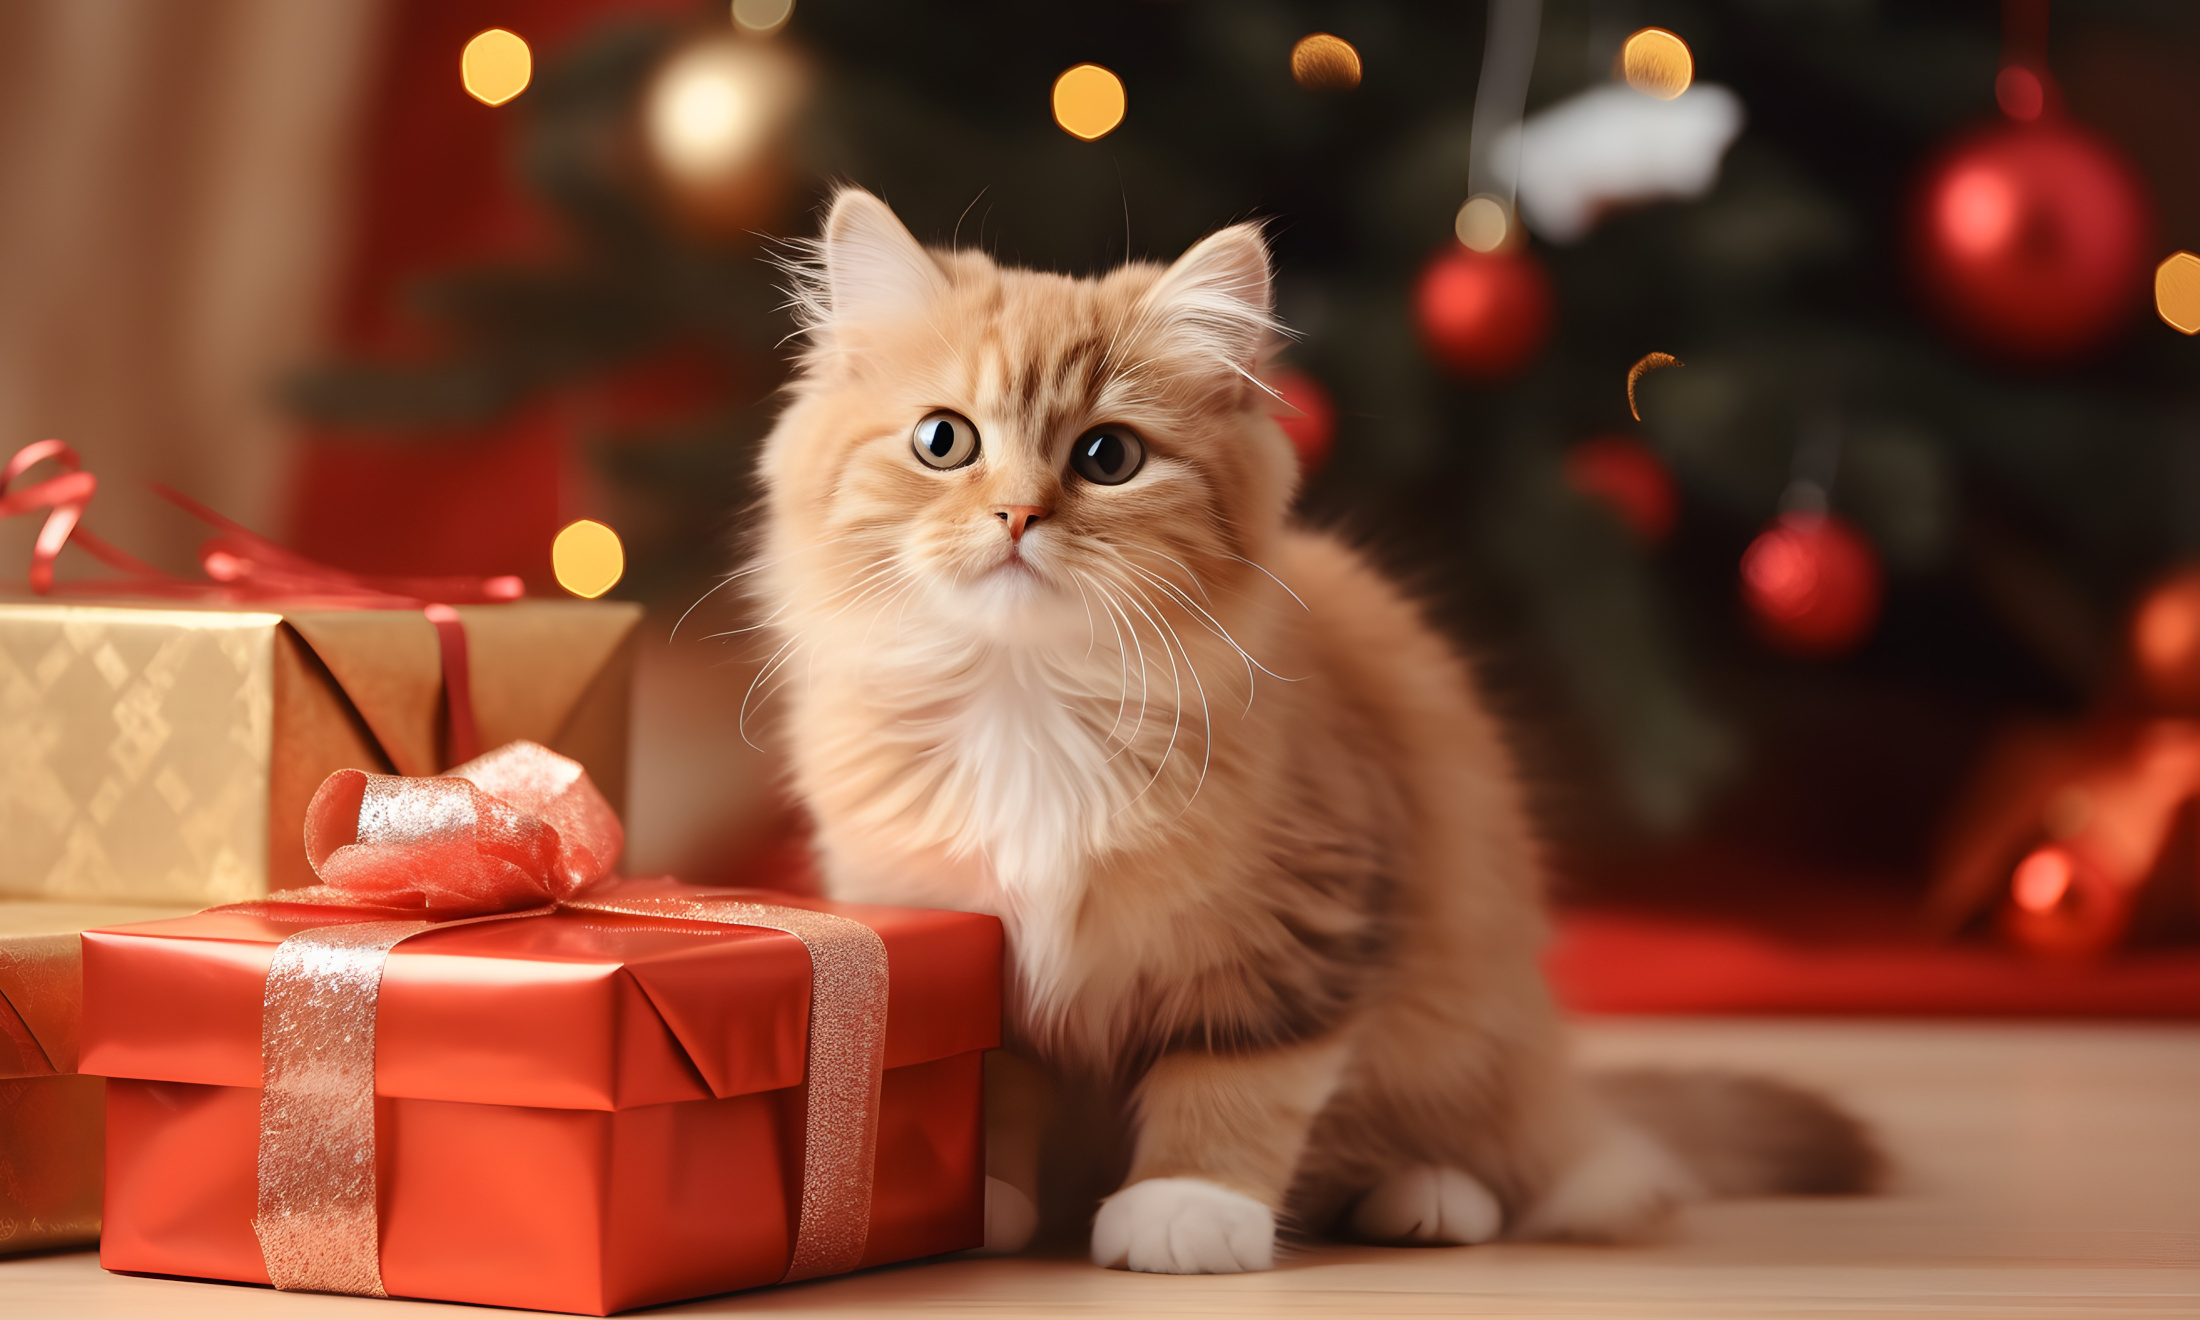 WHAT TO GIVE TO A PERSON WHO LIKES CATS